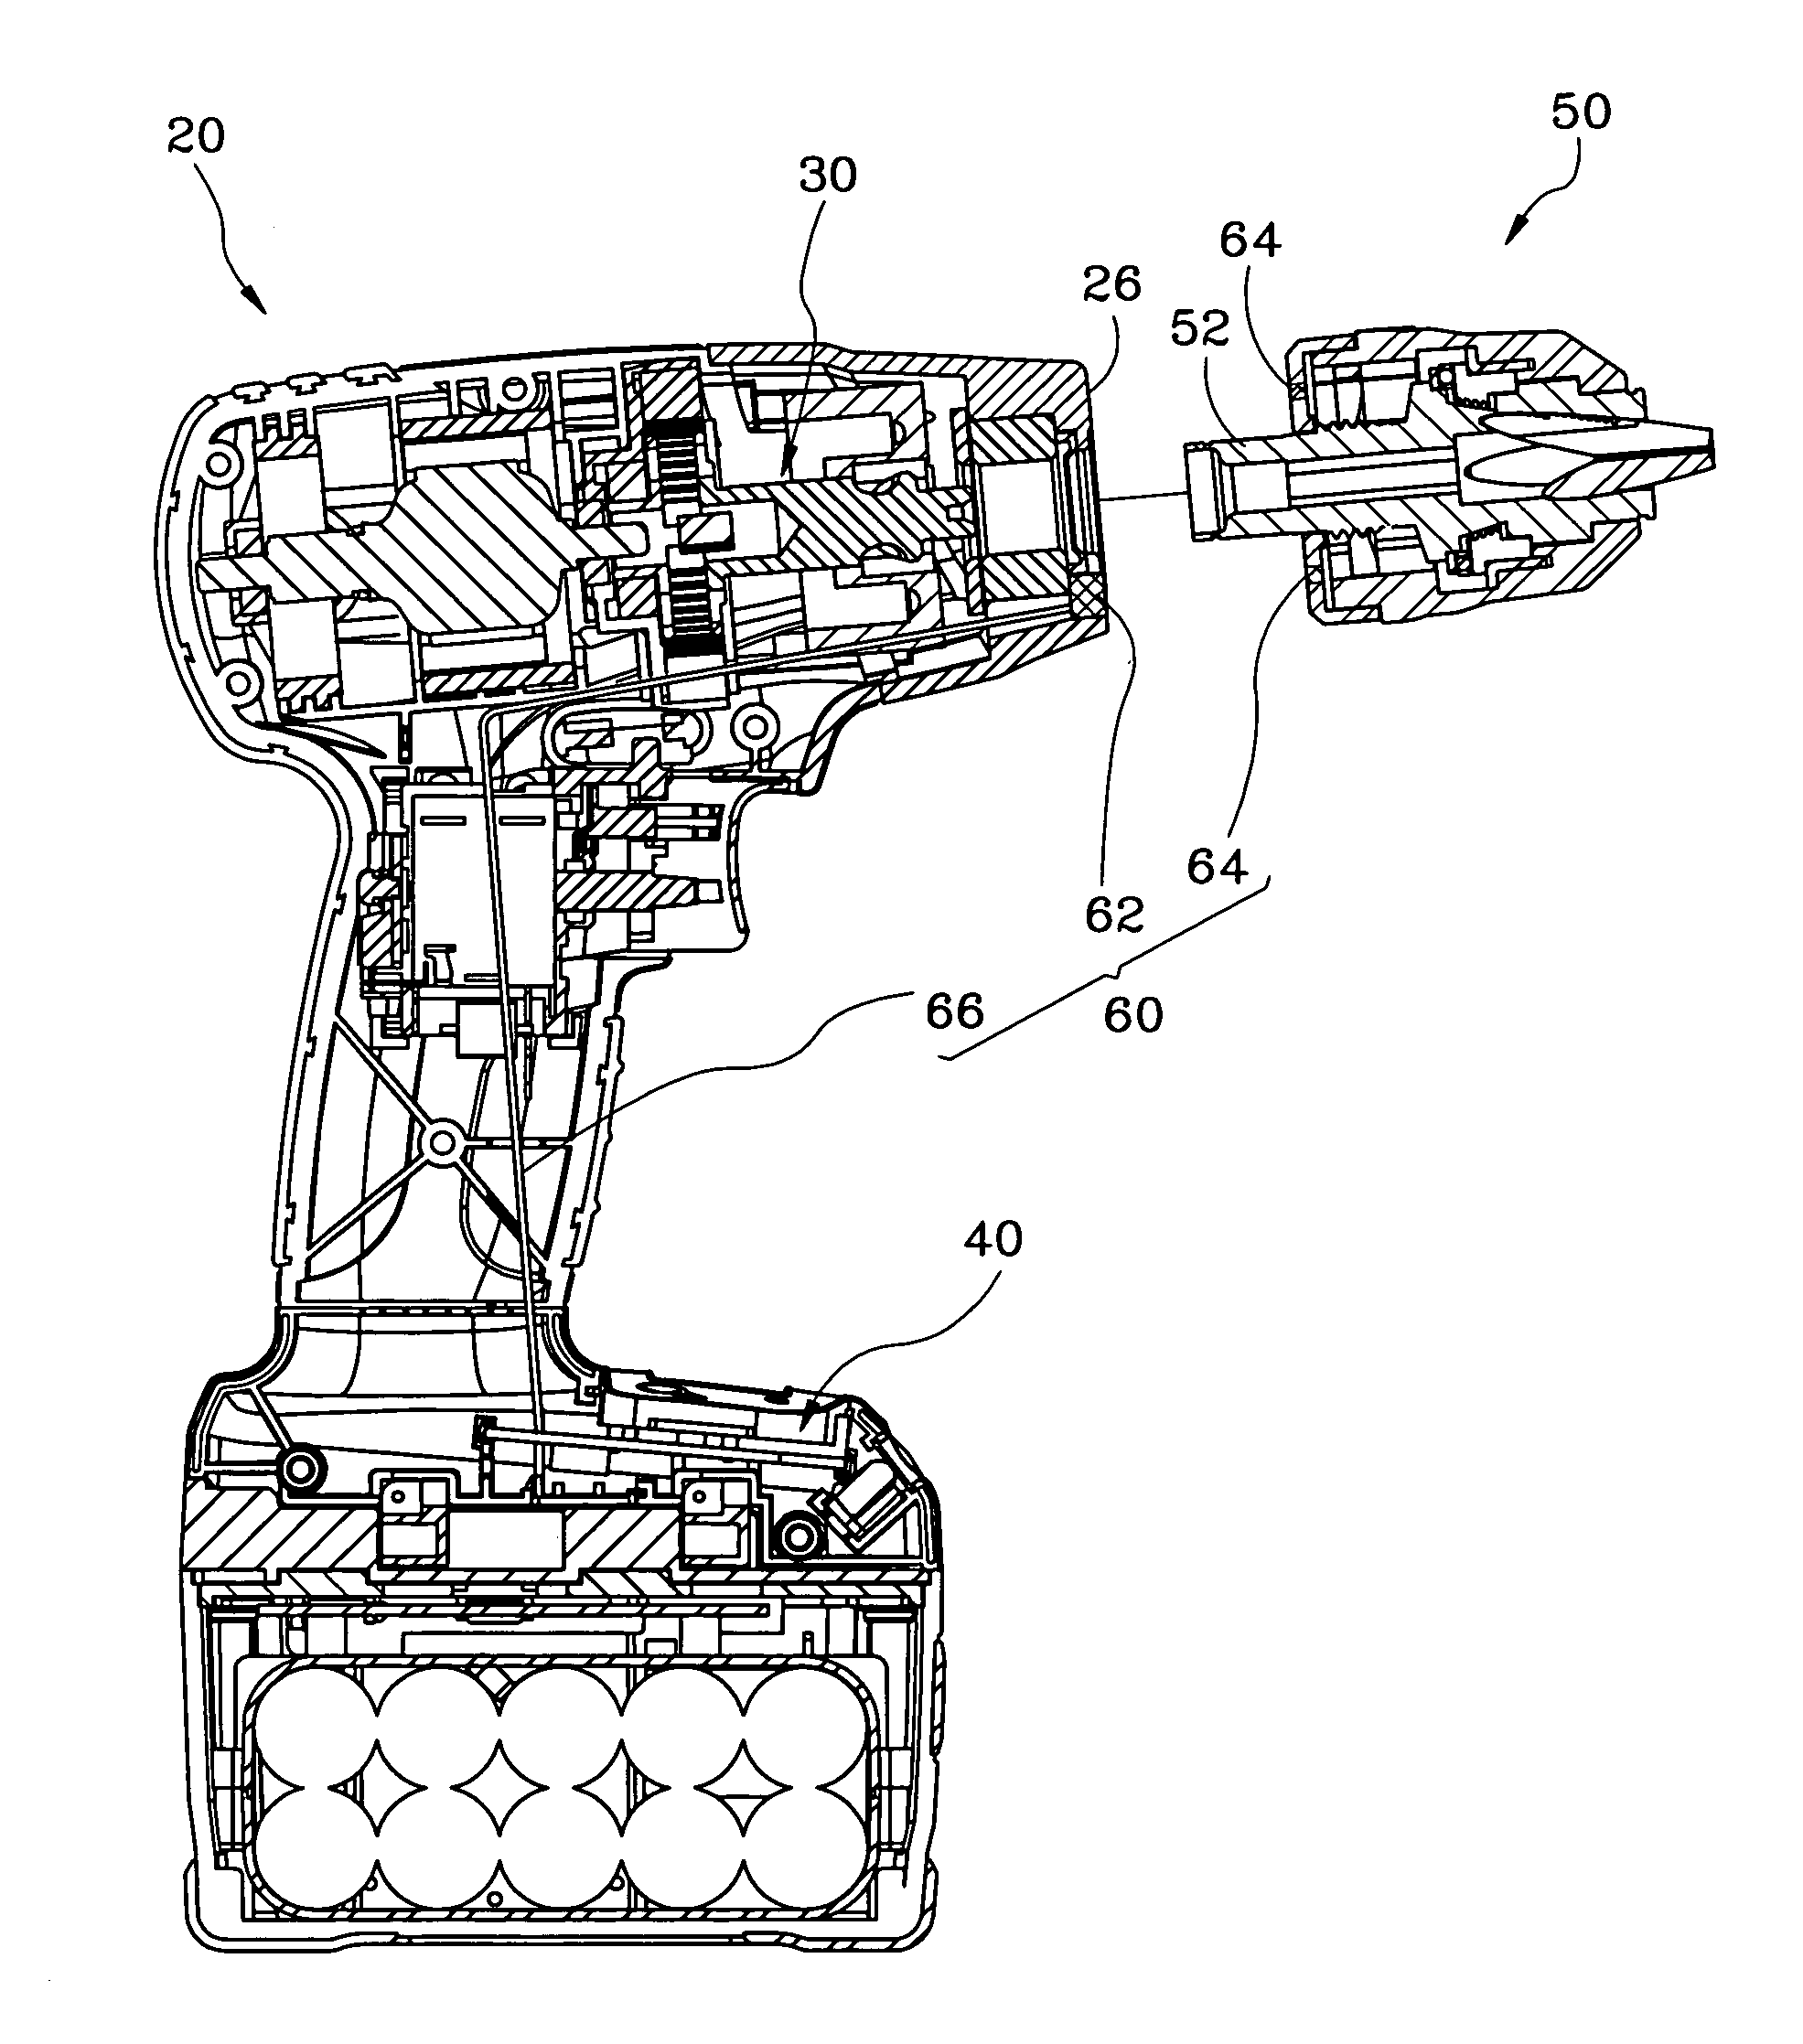 Power tool and torque adjustment method for the same